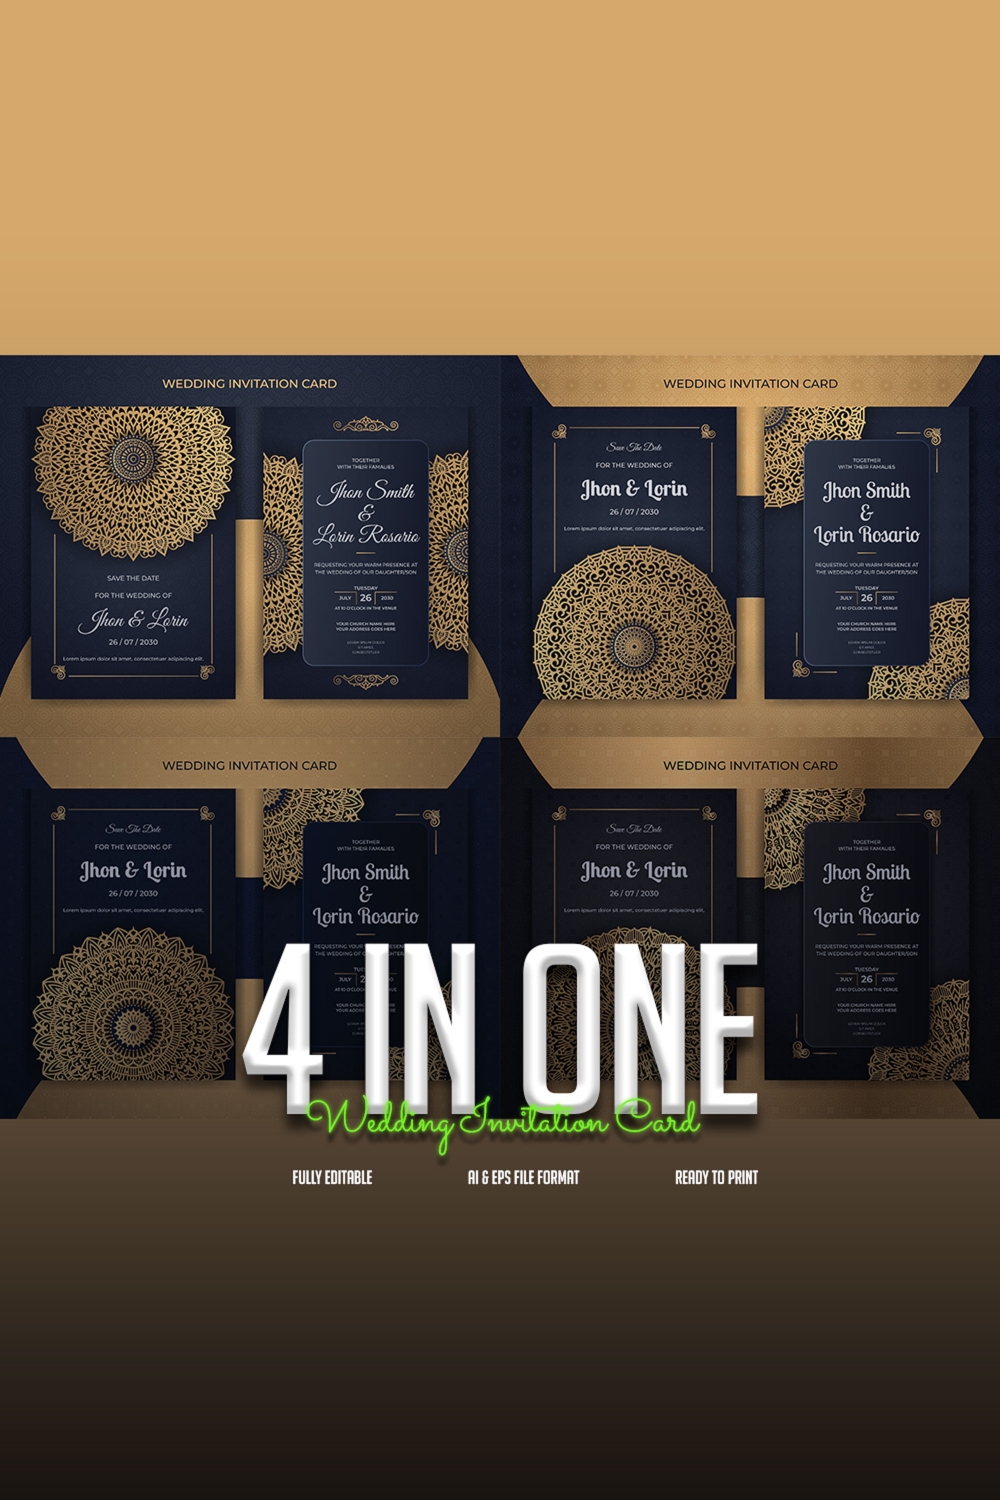 4 In One Royal Luxury Wedding Invitation Card Only In $7 pinterest image.